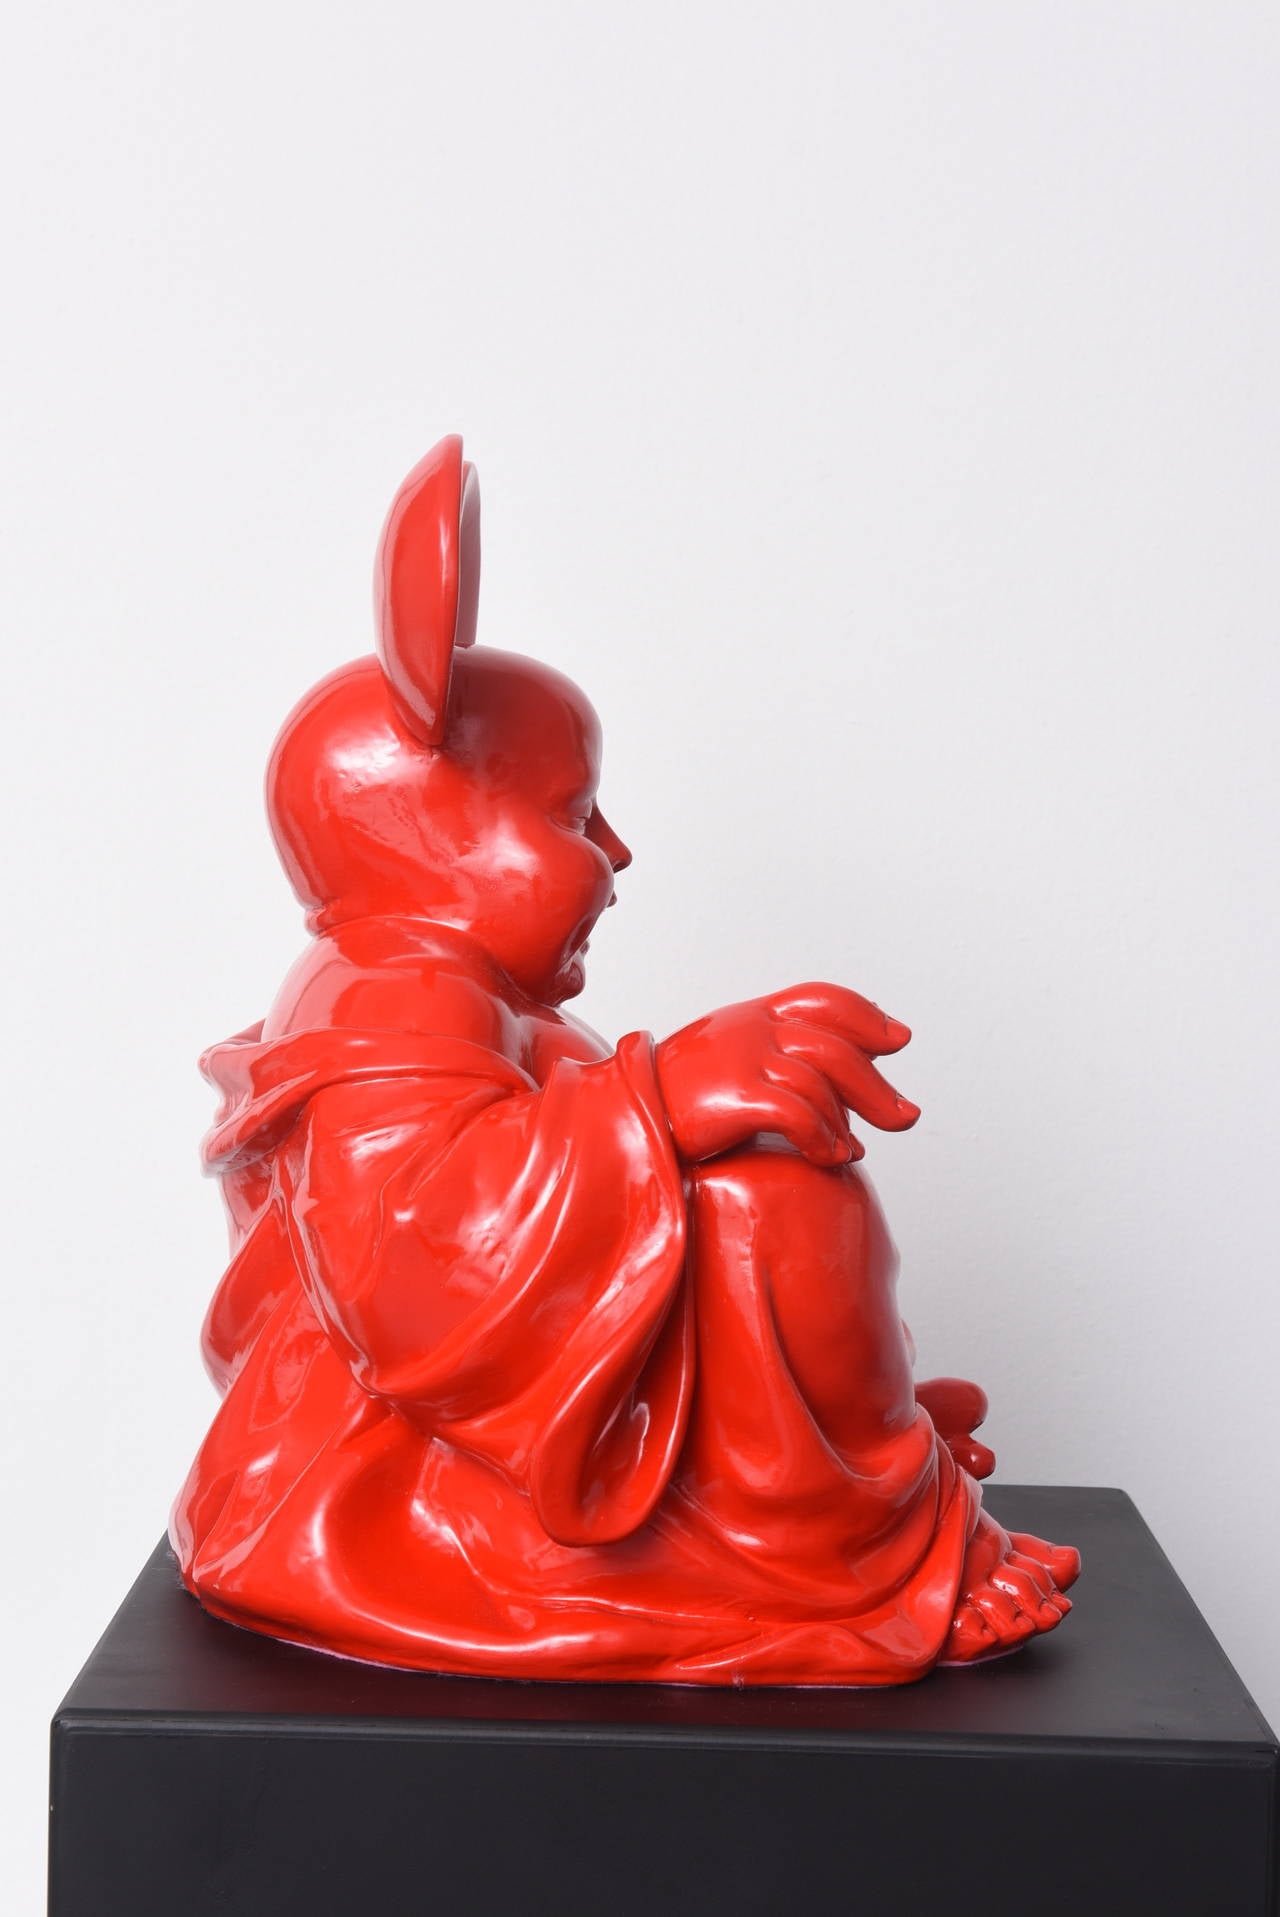 Boud'key is a resin sculpture made by Patrick Schumacher, a French contemporary artist. This fusion between Buddha and Mickey is the artist's ironic response to the term “globalization” and the rise of consumer society at the expense of